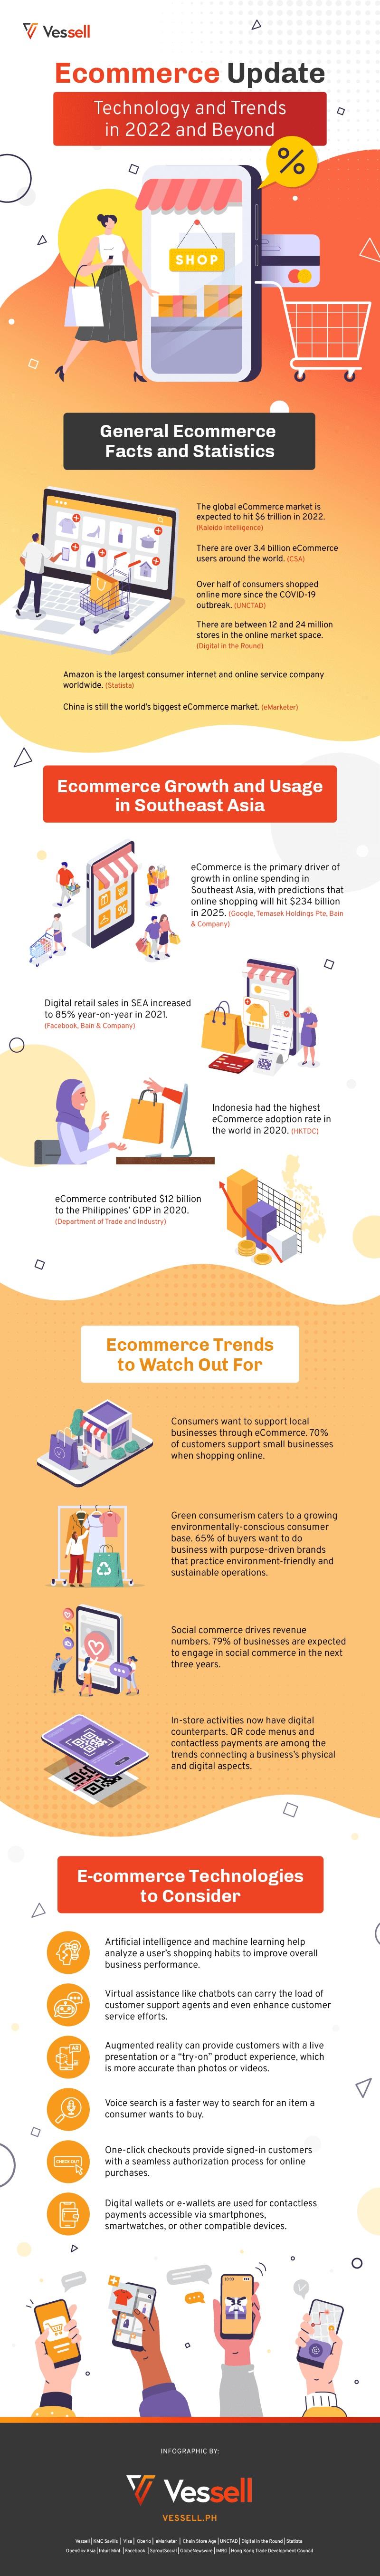 Ecommerce Update Technology and Trends in 2022 and Beyond #infographic #Technology #infographics